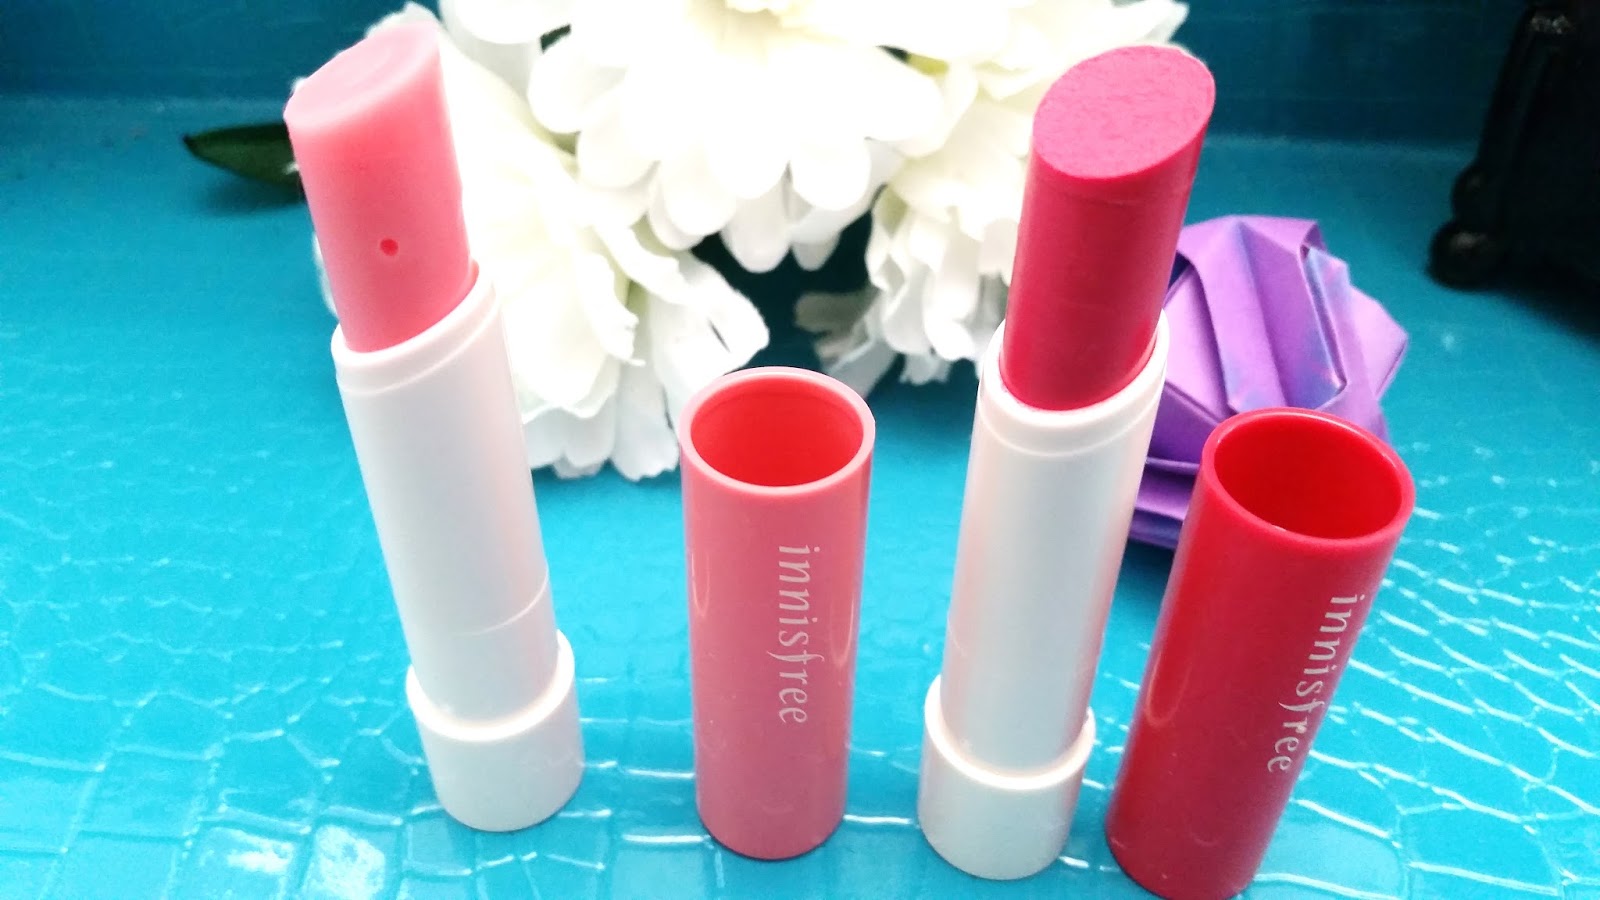 Innisfree Eco Flower Tint Balm Review Dreams to Creations